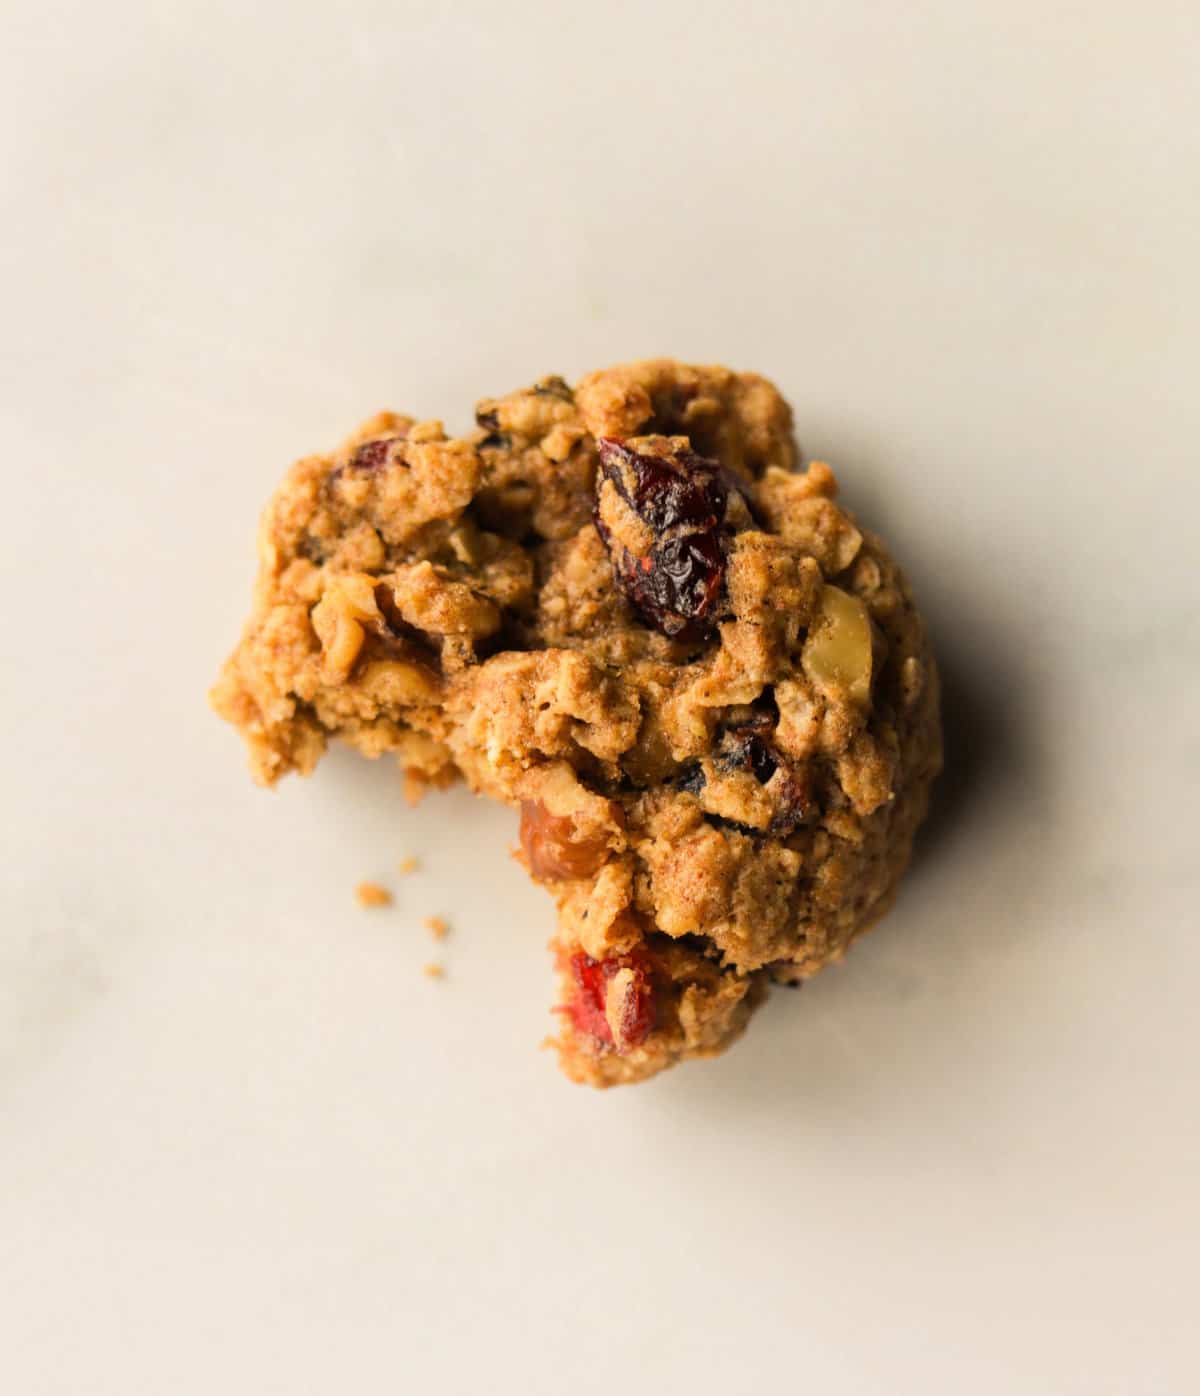 An overhead shot of a single oatmeal cranberry cookie with a bite taken out of it.